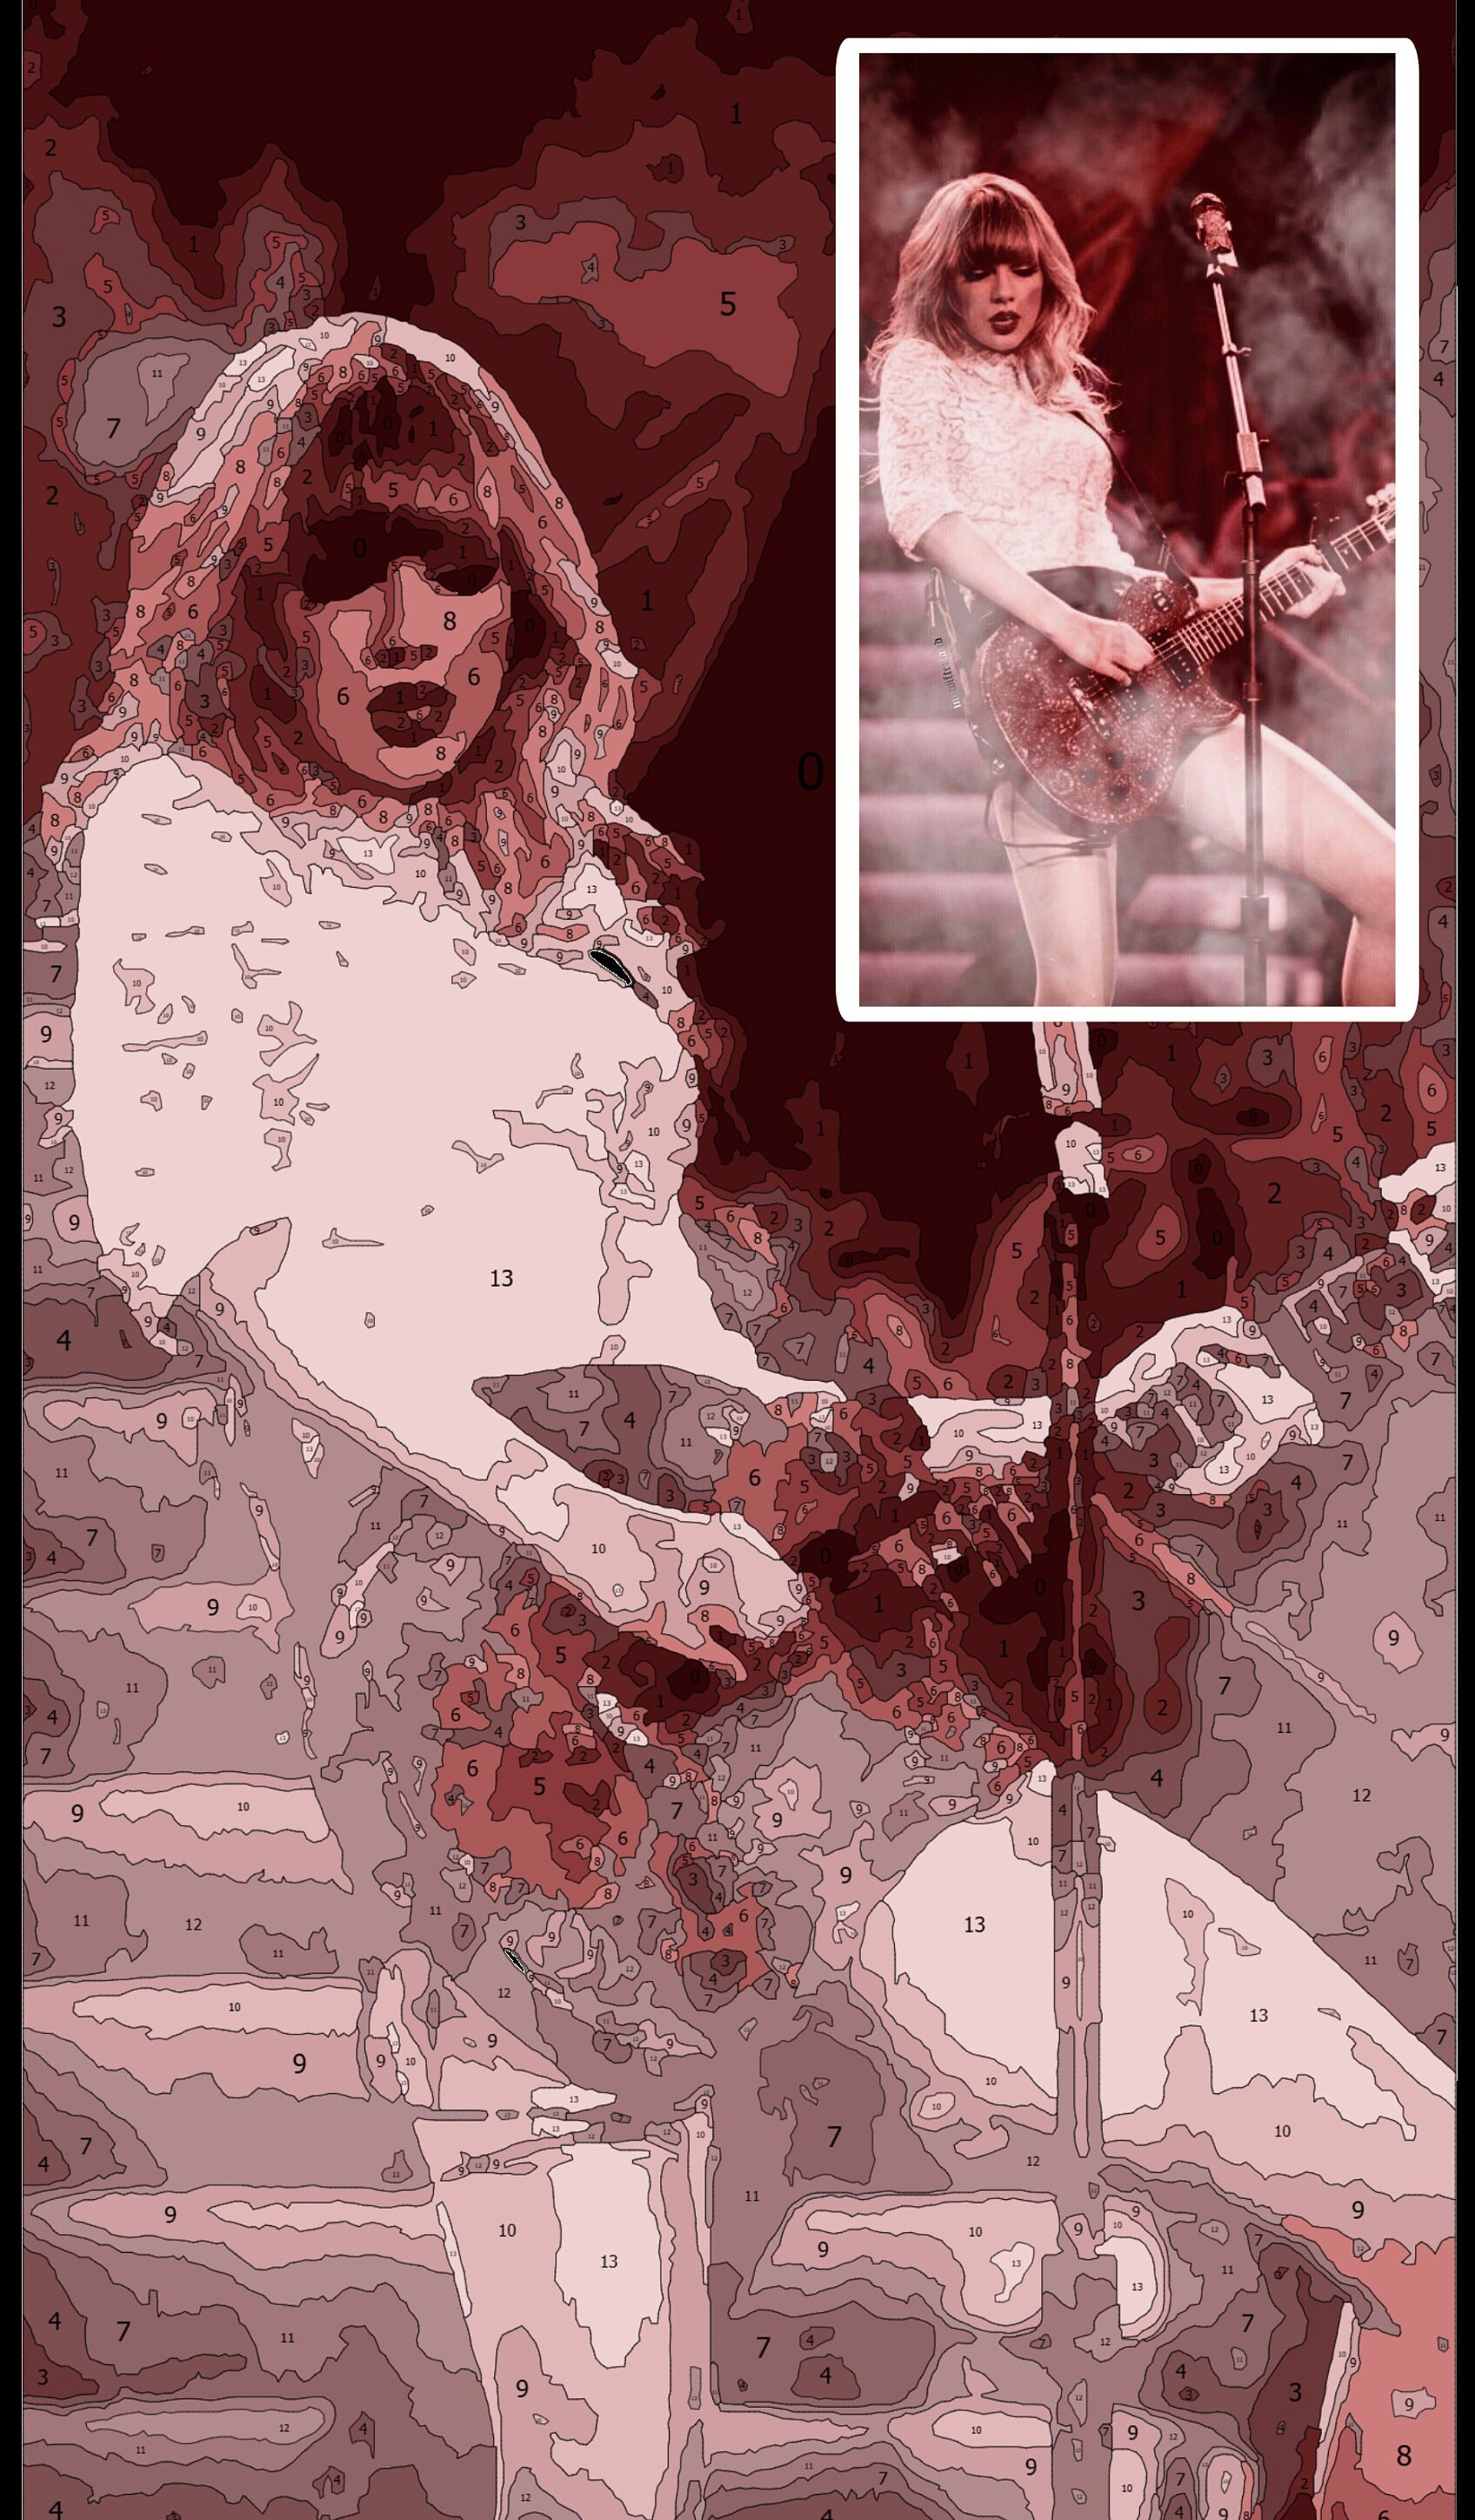 The Pretty Taylor Swift - Singers Paint By Numbers - Paint by numbers UK